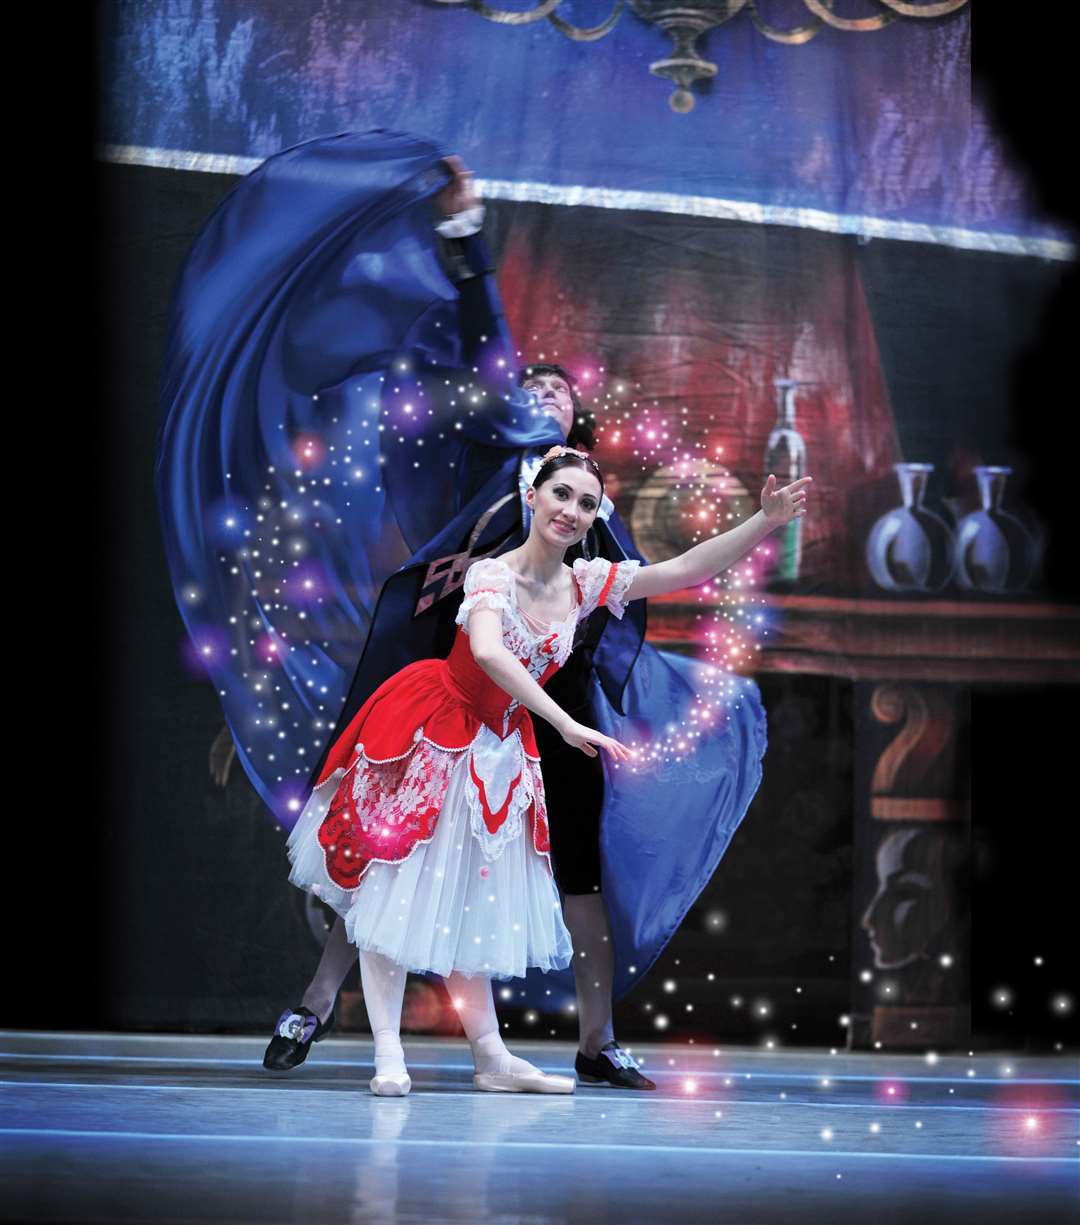 Russian State Ballet of Siberia will perform Coppelia